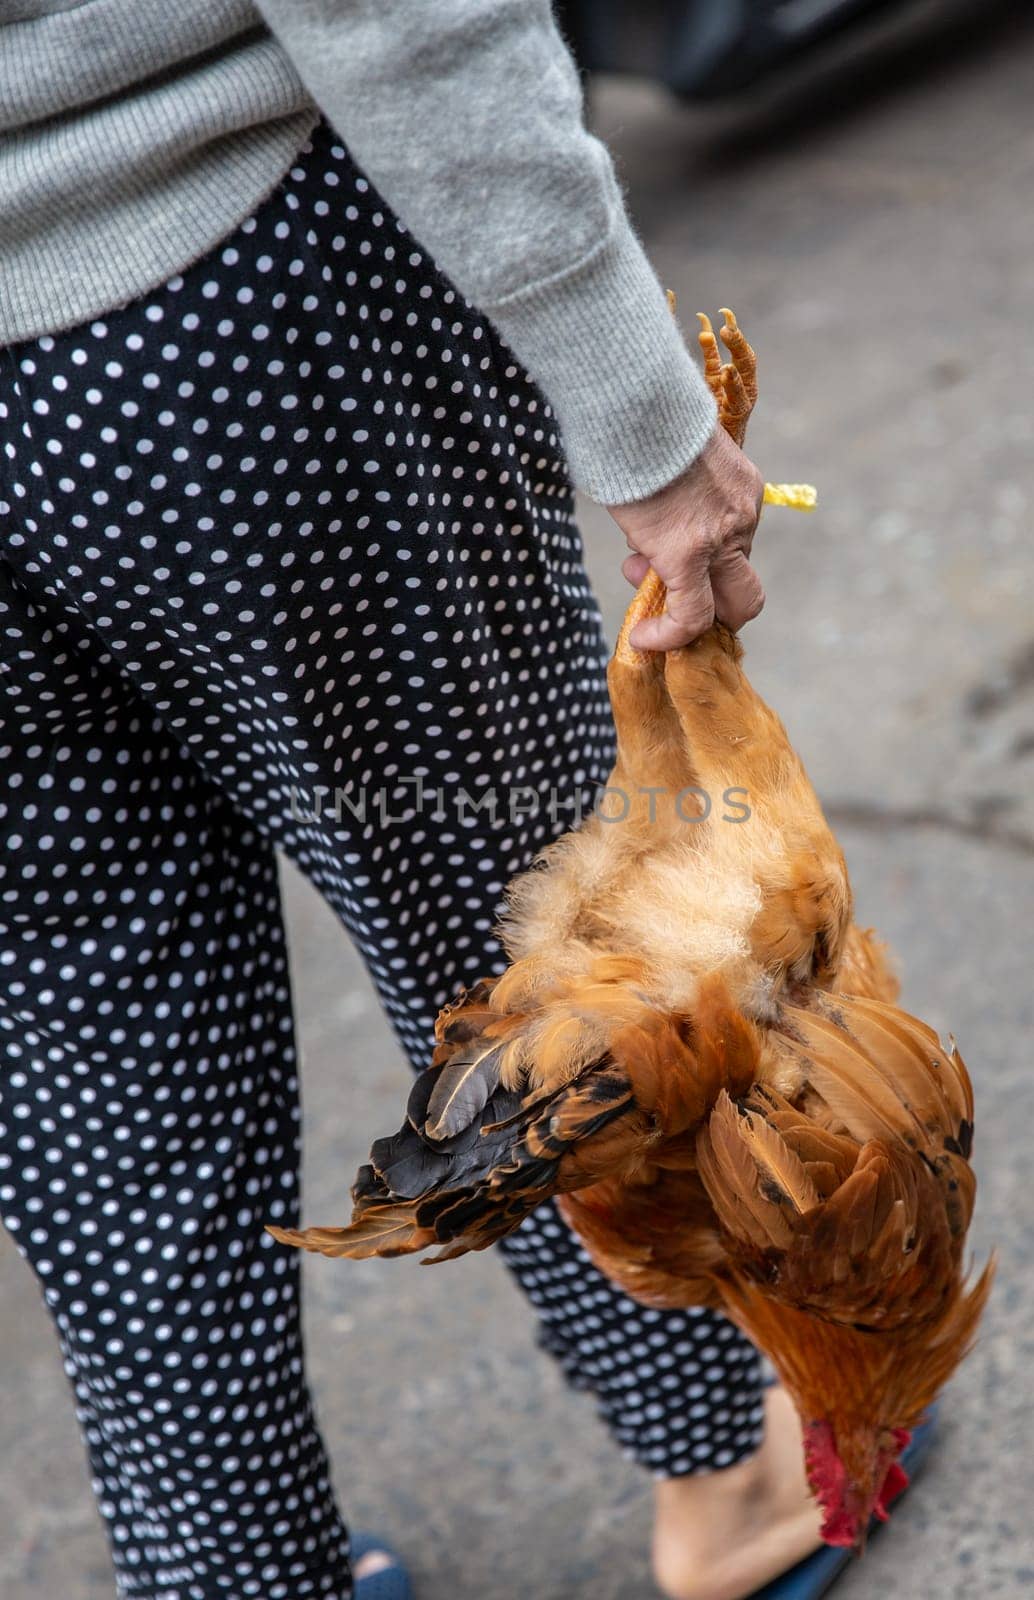 Vietnamese Woman Carrying Chicken to prepare for dinner